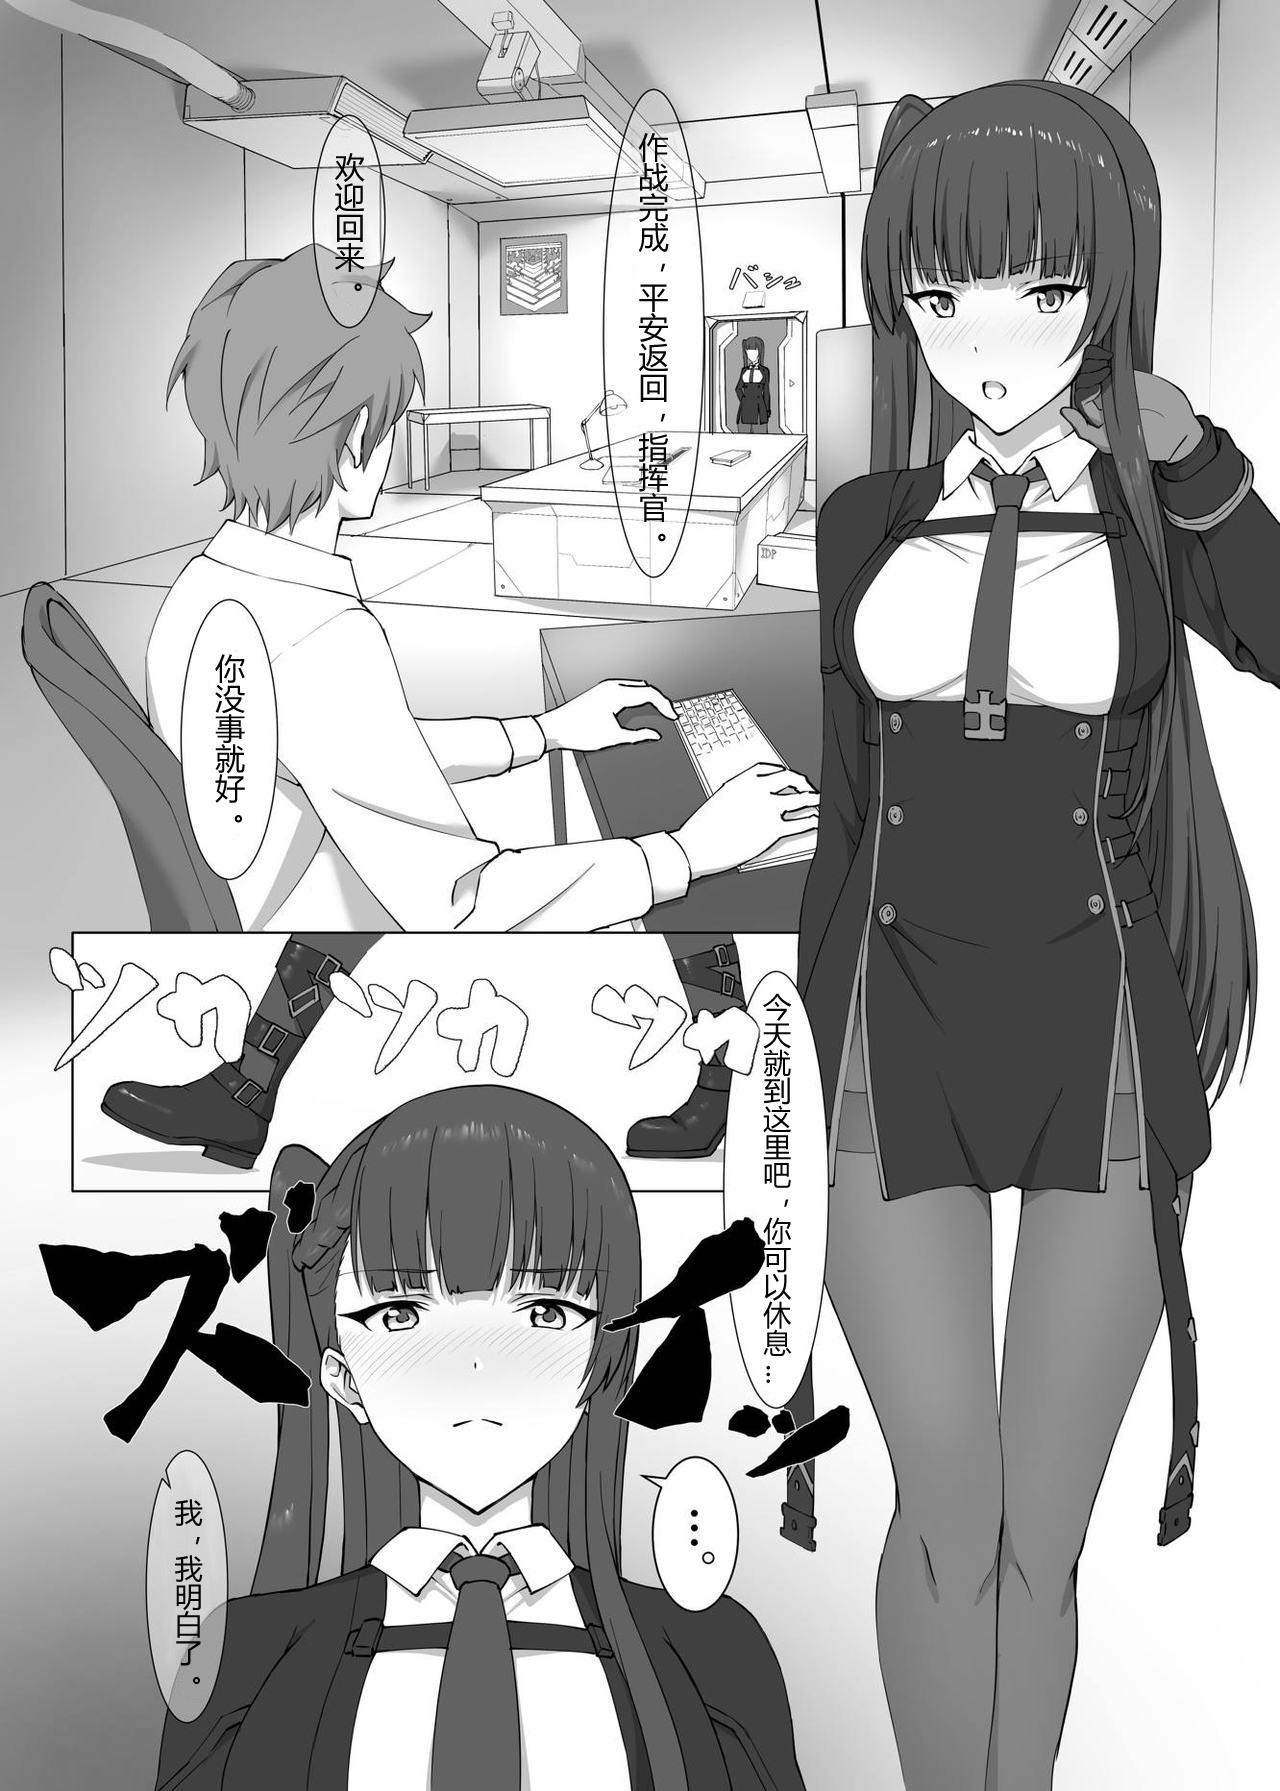 Anal Porn My meaning of Existence - Girls frontline Free Rough Sex - Page 2